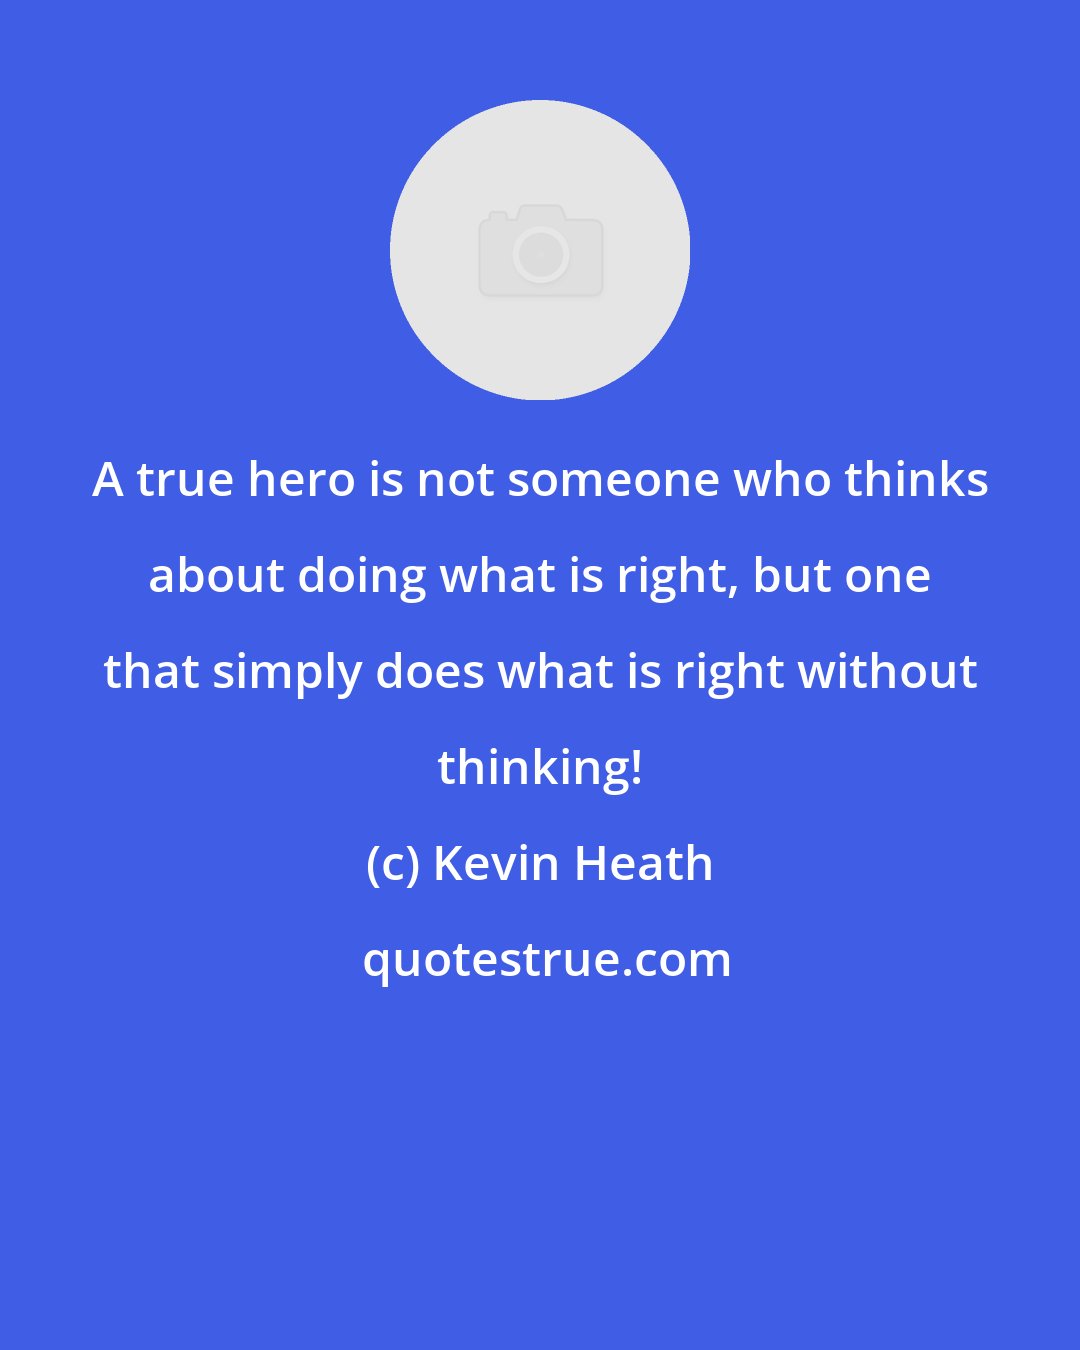 Kevin Heath: A true hero is not someone who thinks about doing what is right, but one that simply does what is right without thinking!